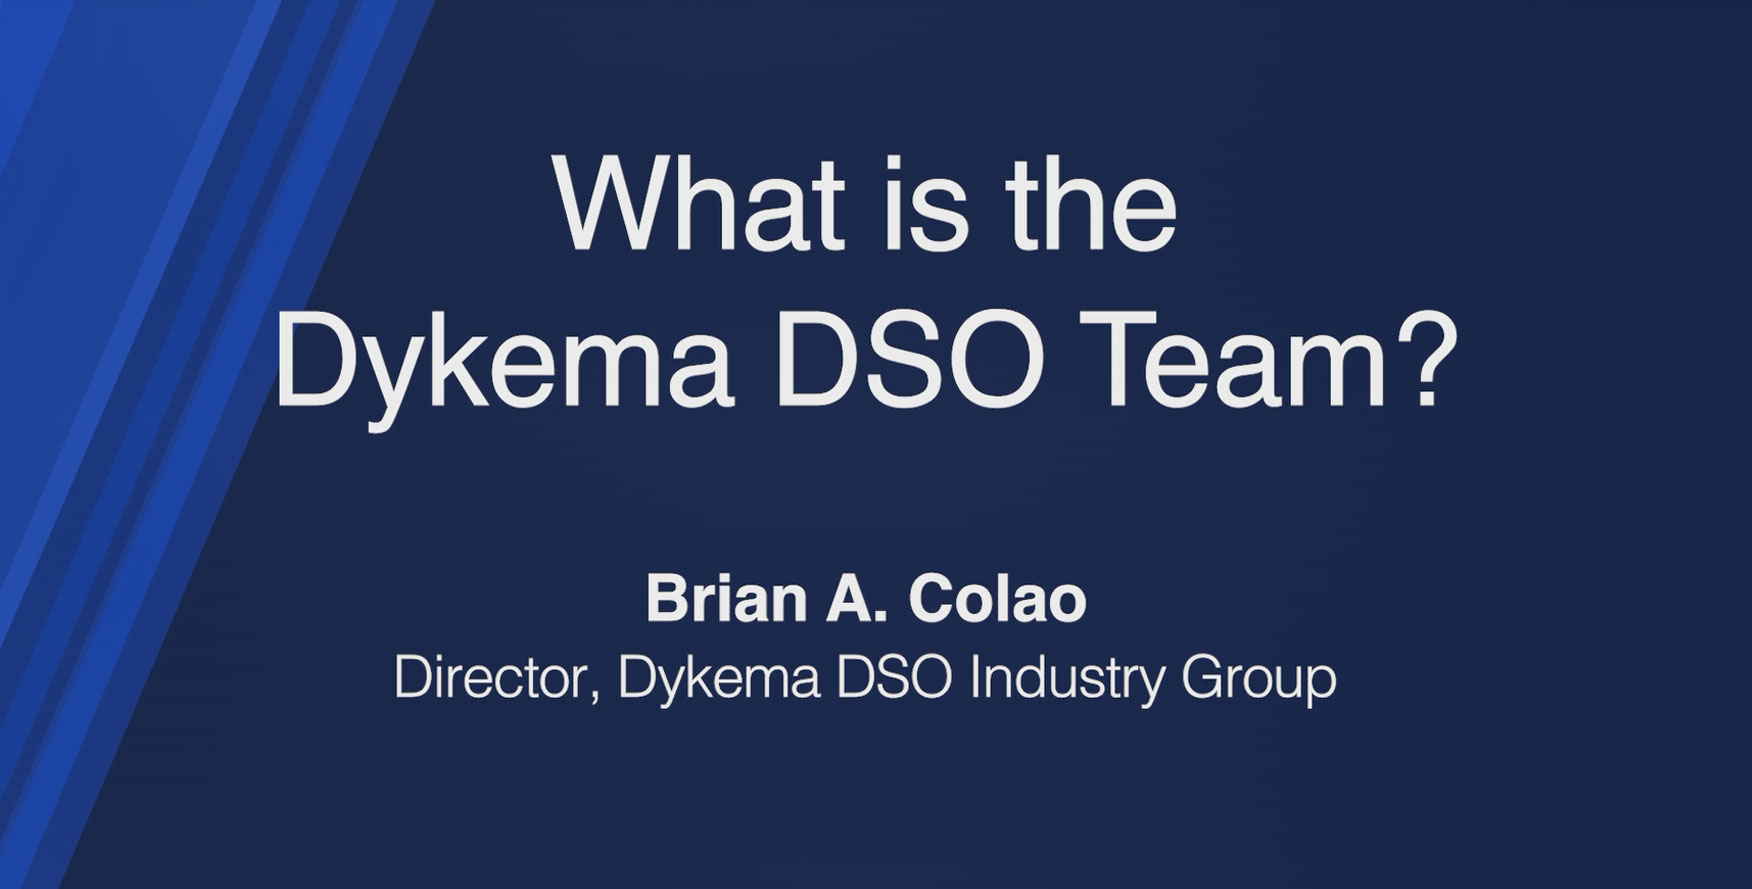 What is the Dykema DSO Team?